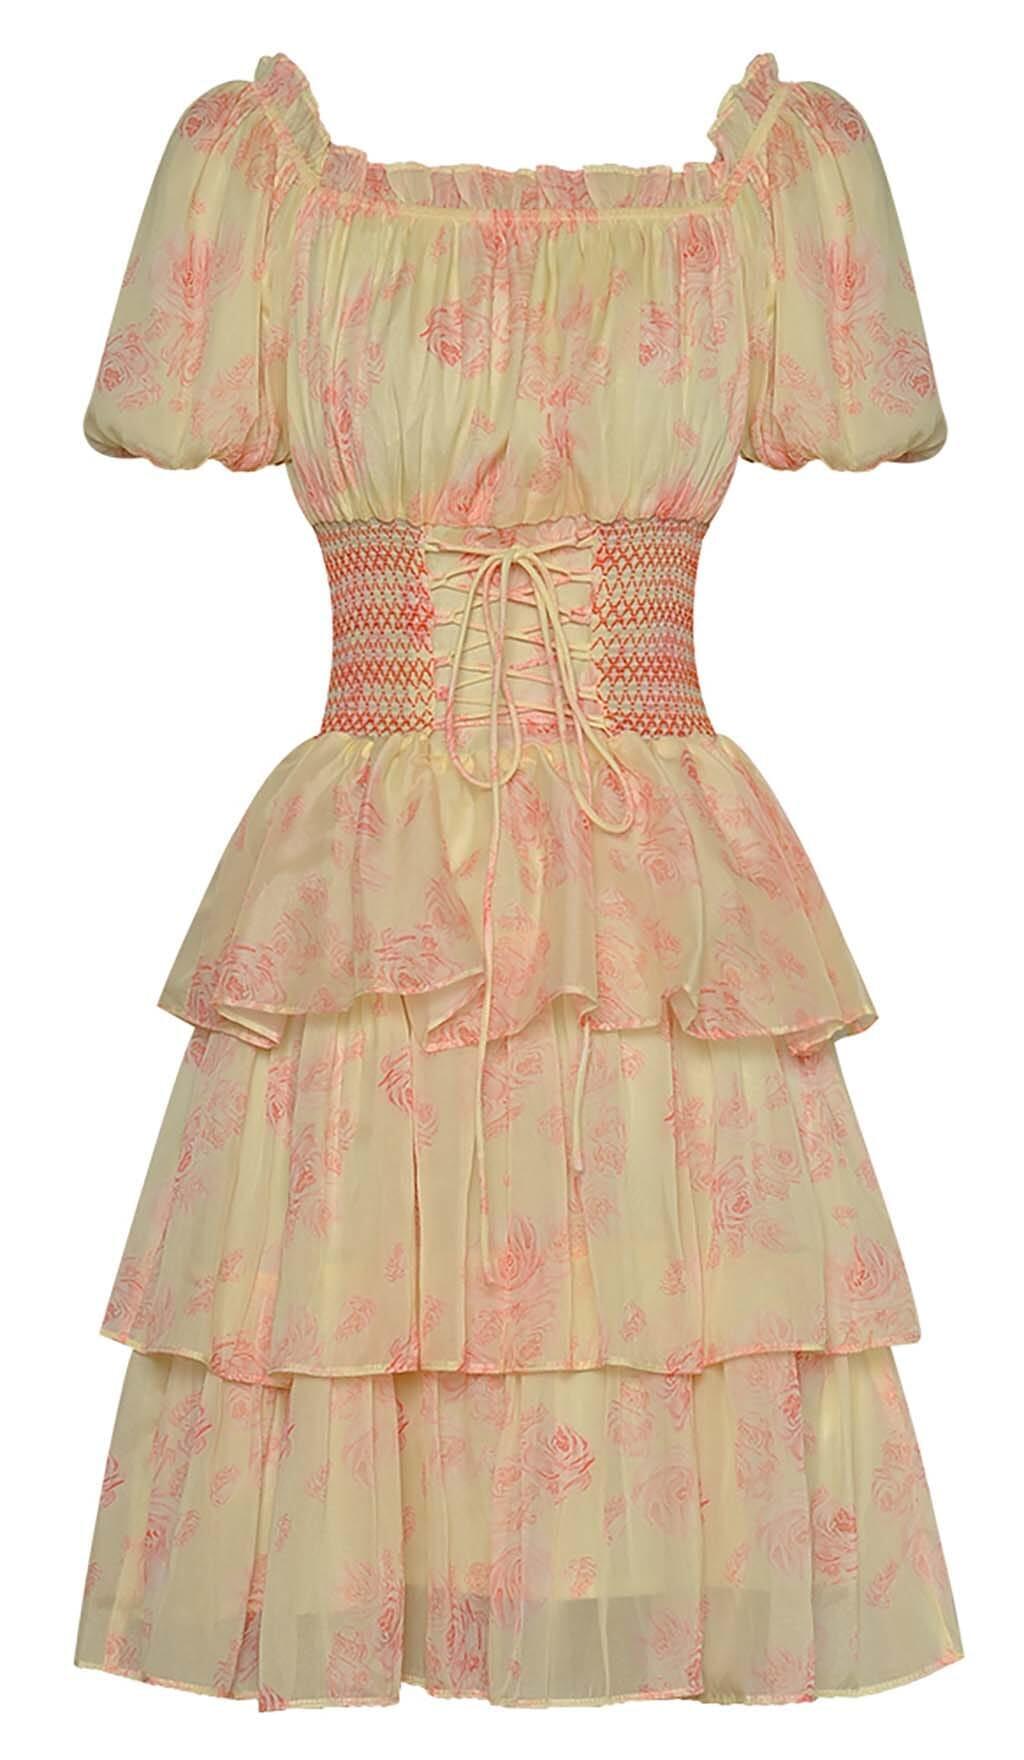 PUFF SLEEVE TIERED MIDI DRESS IN PINK